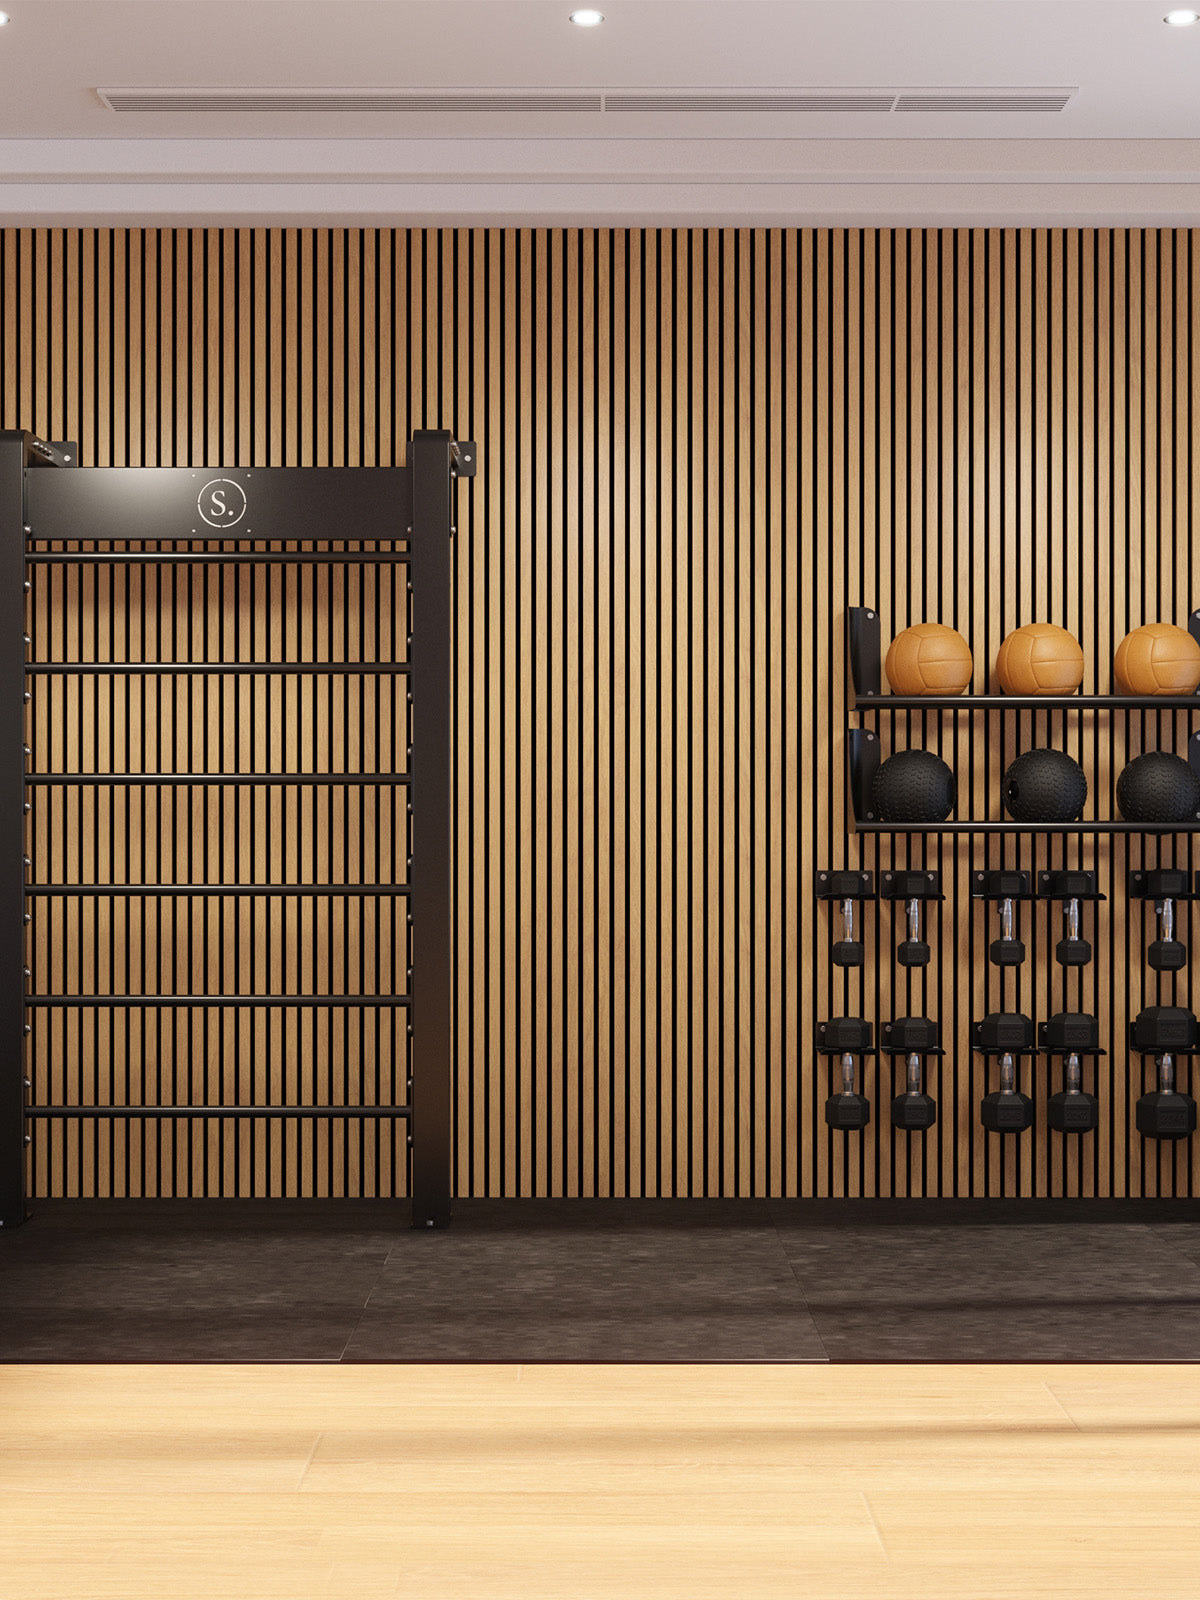 dumbbell and wall ball storage against a wooden slat wall